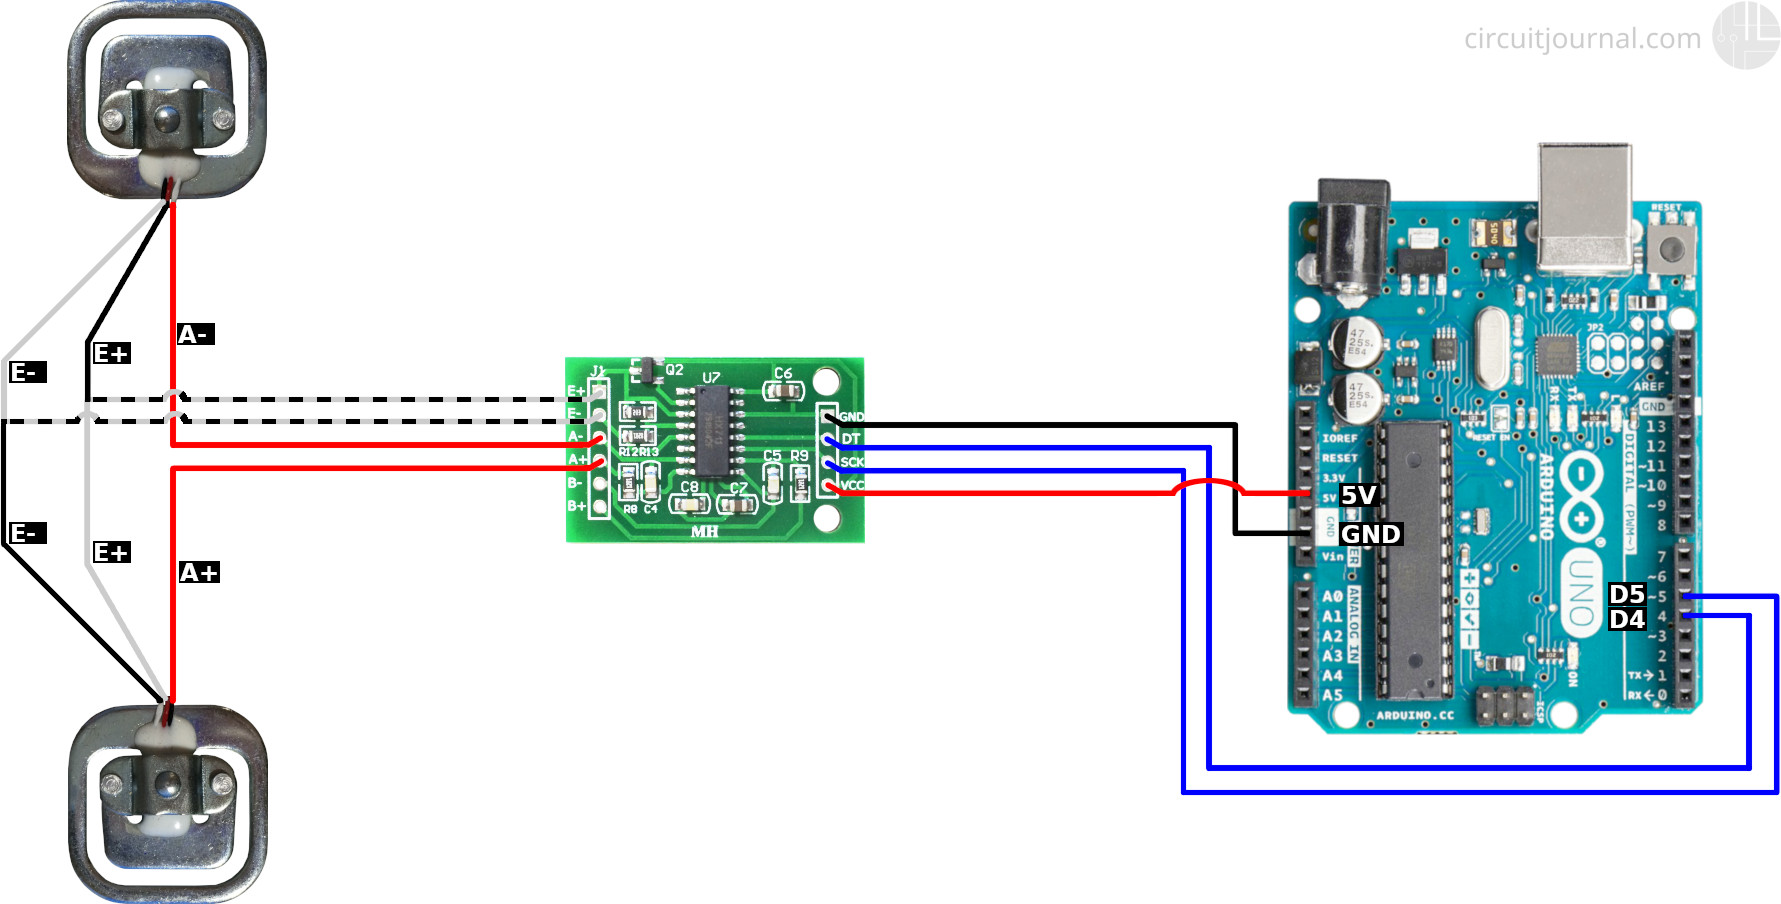 Connecting 2x50kg bathroom scale load cell modules to Arduino with the HX711 module